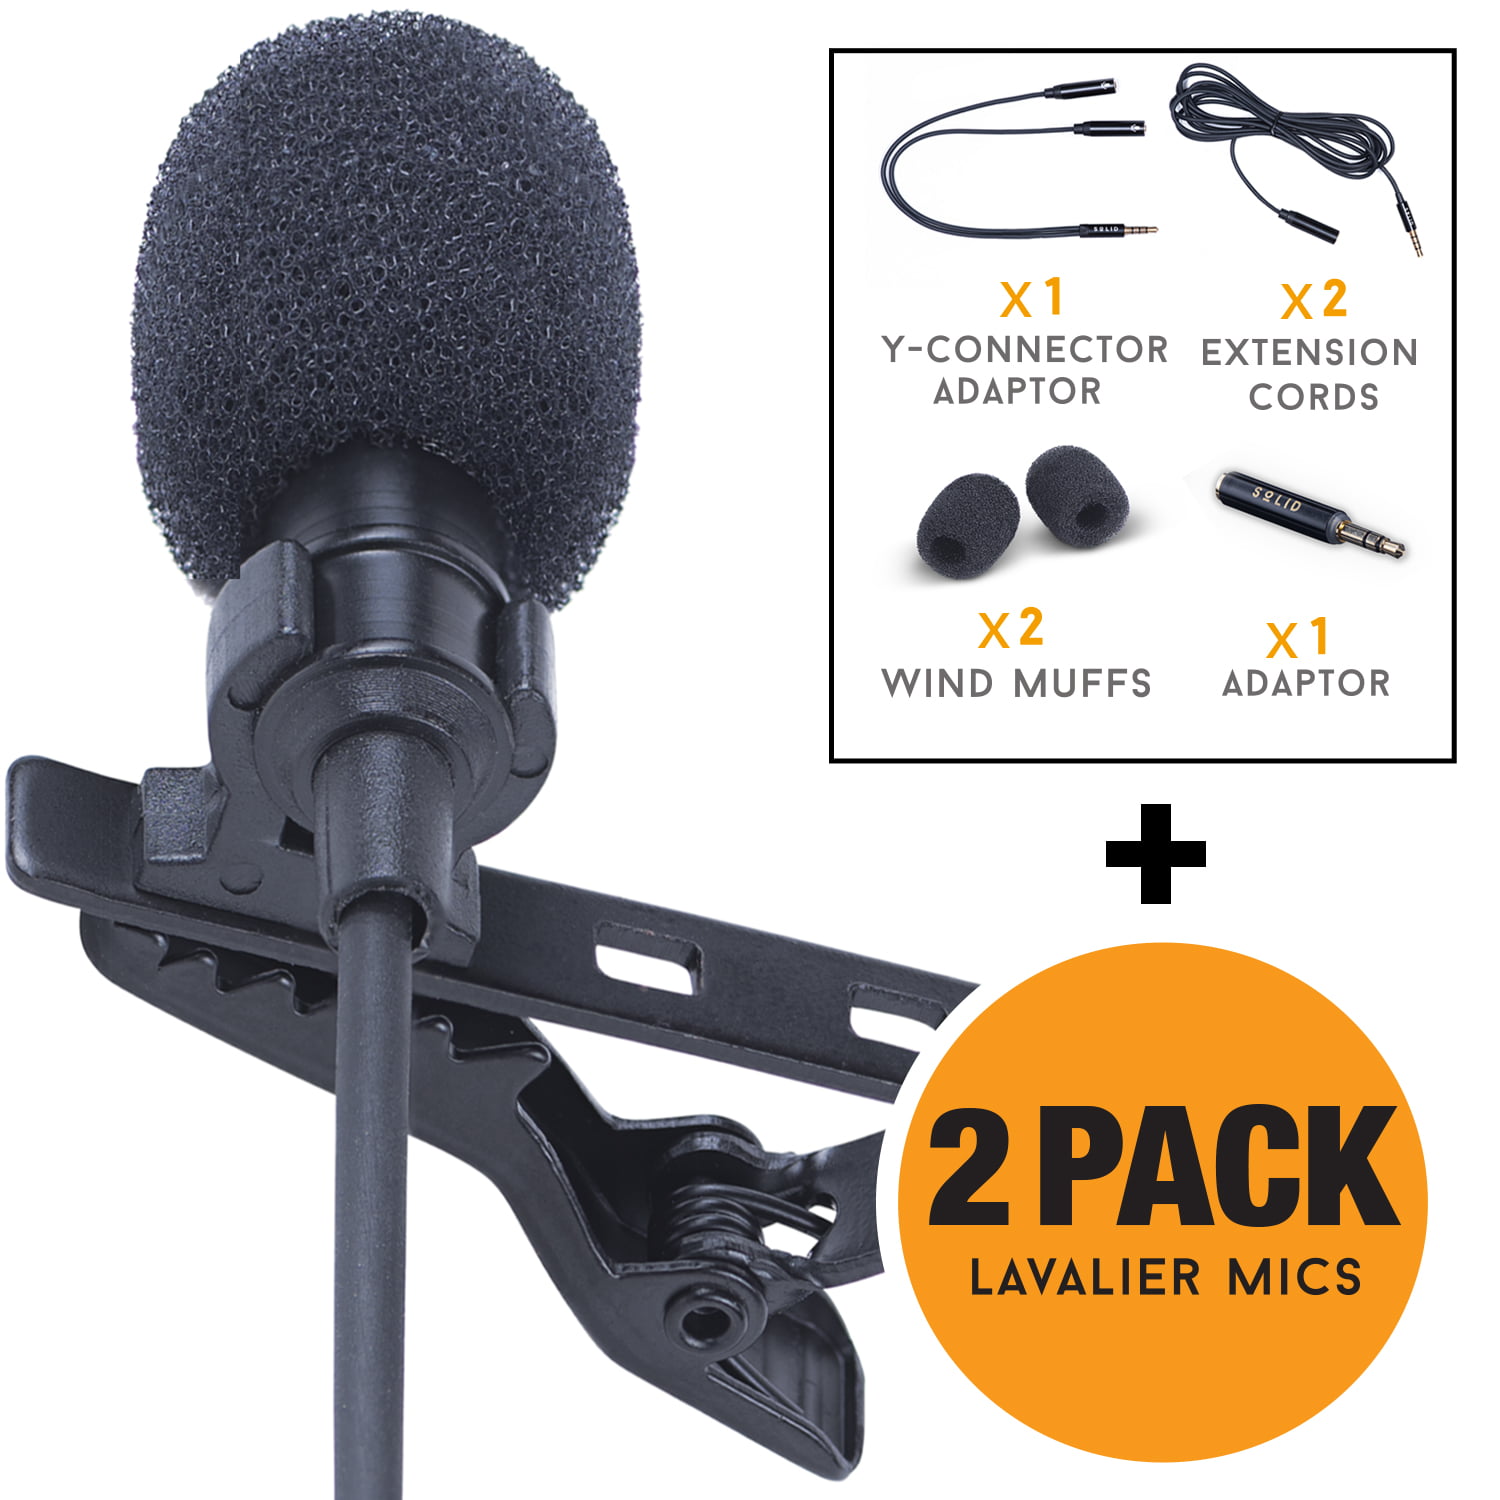 Hands-Free lavalier Microphone for Smartphone//PC//Laptop Lavalier Microphone Professional with Type-C Adapter for Recording//YouTube//Interview